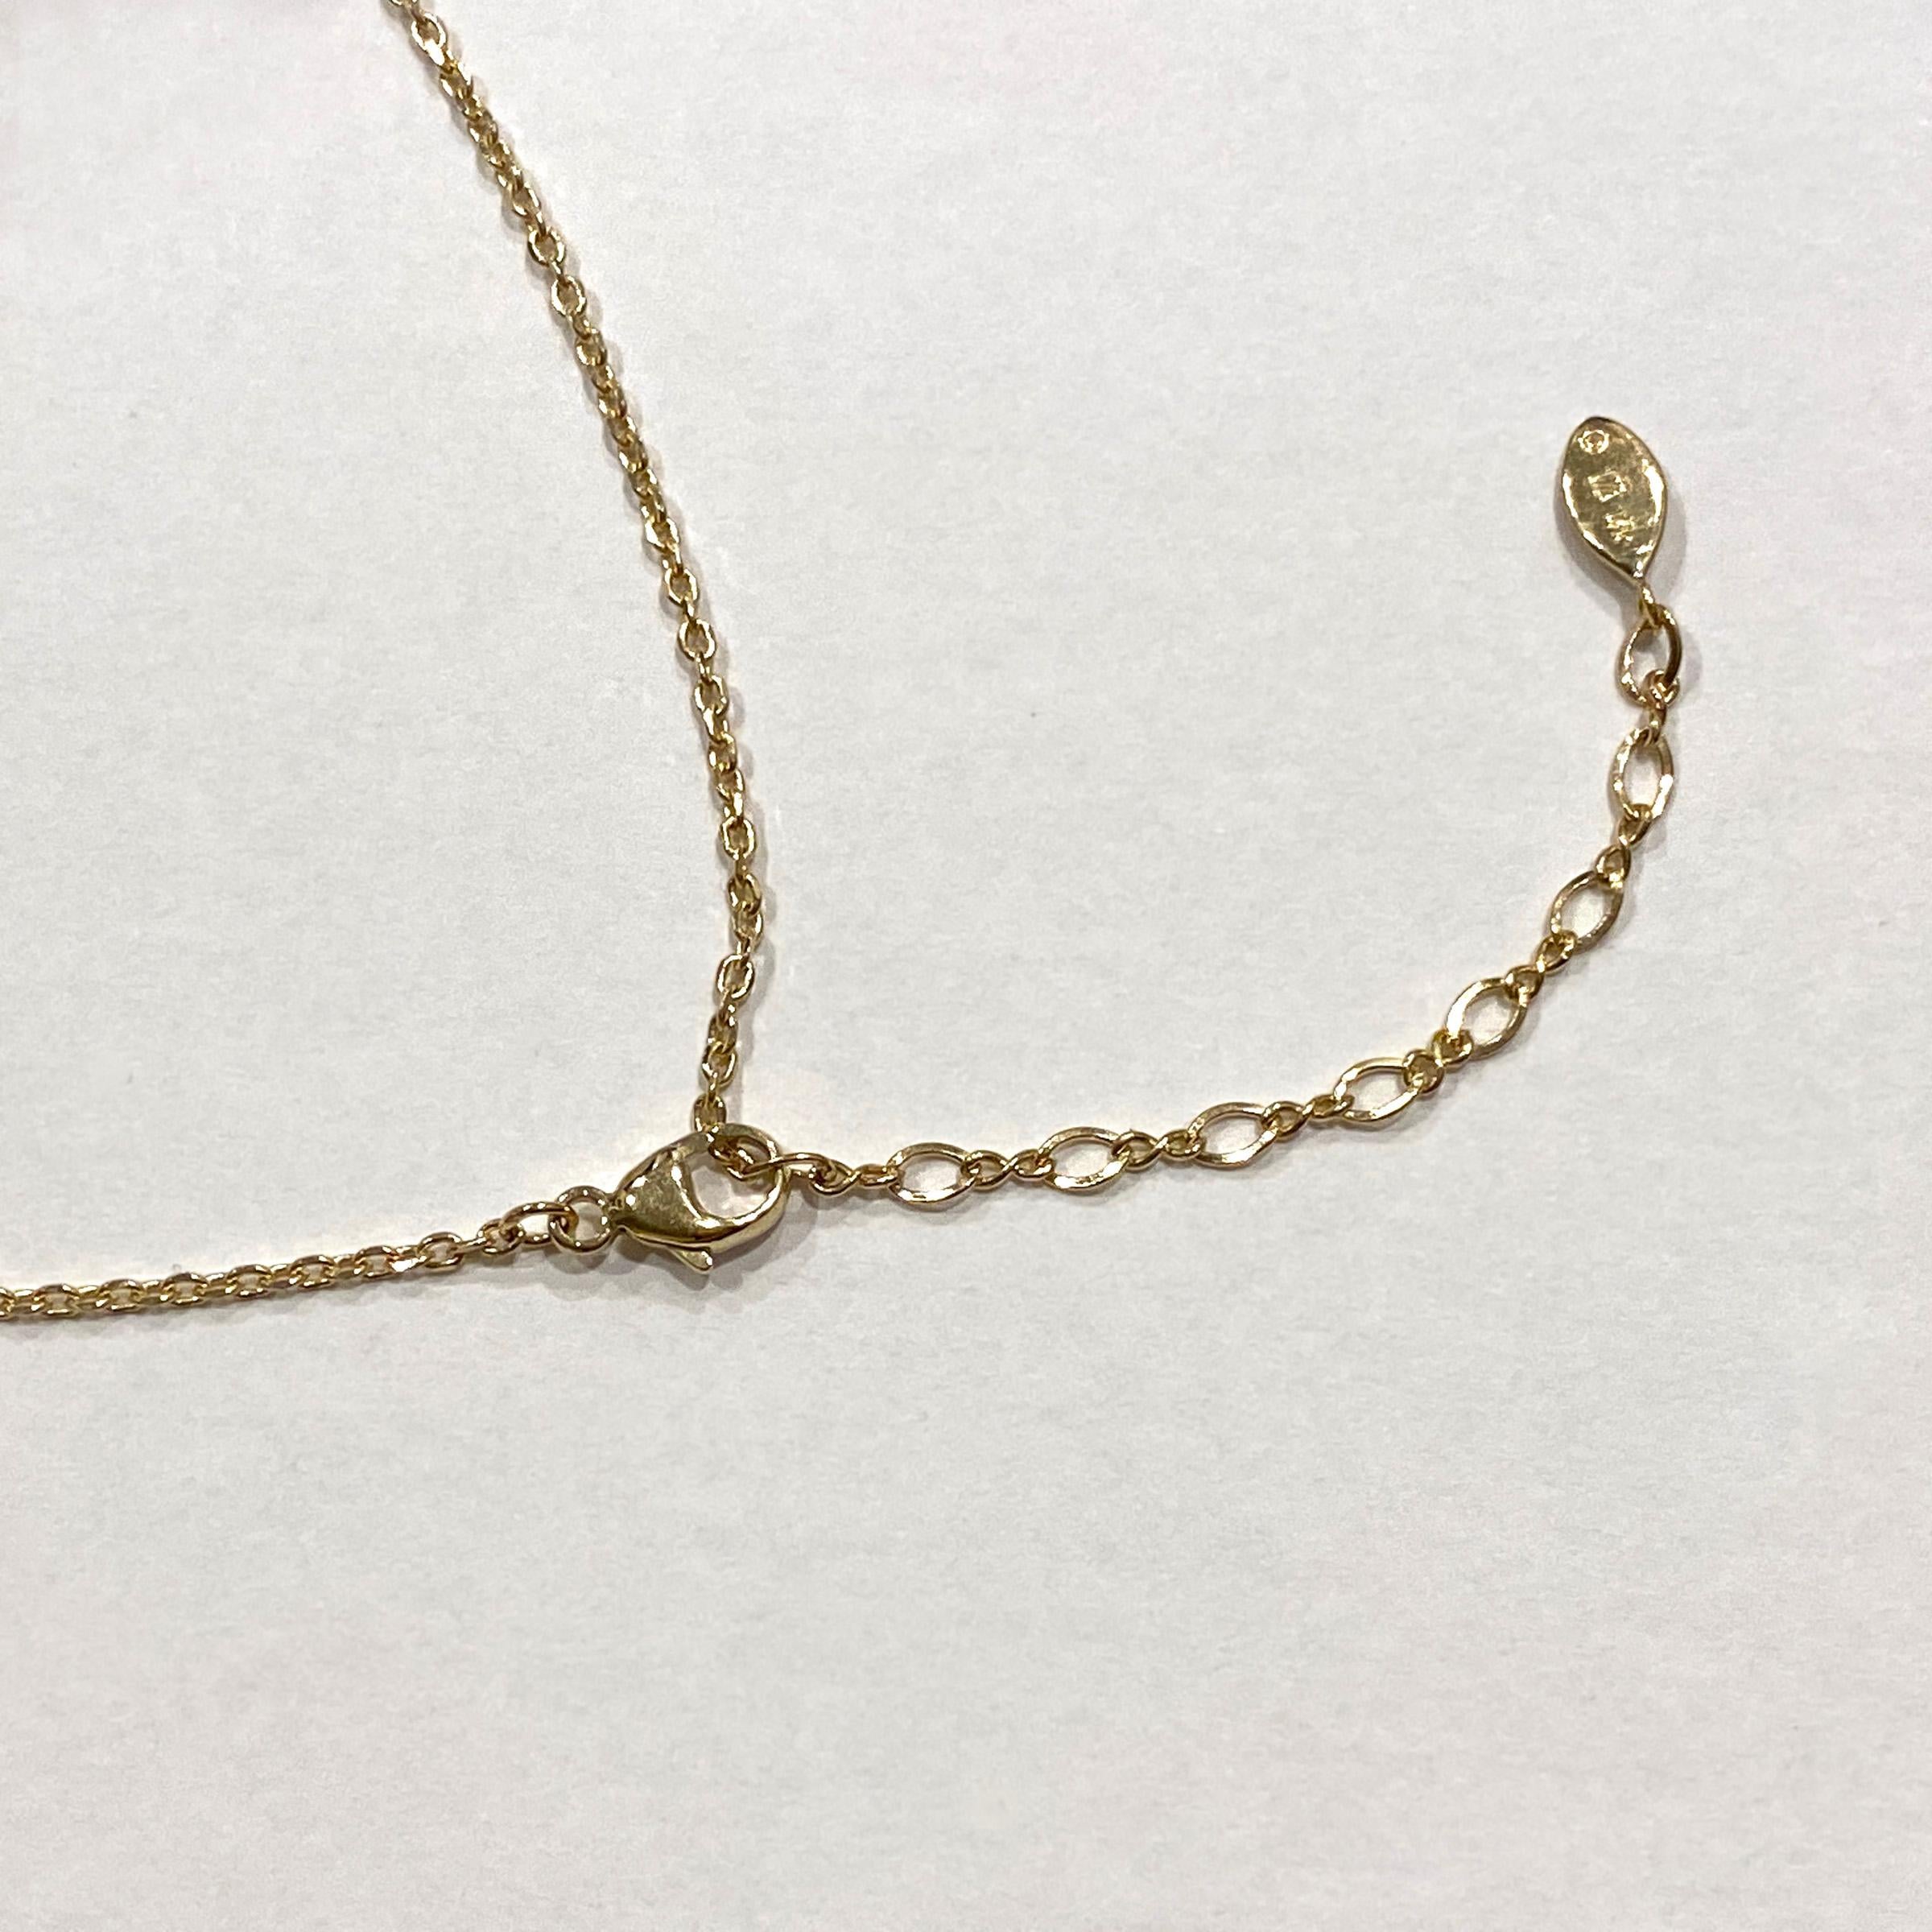 Contemporary 14 Karat Gold Seaside Necklace with Diamond Accents and an Adjustable Chain For Sale